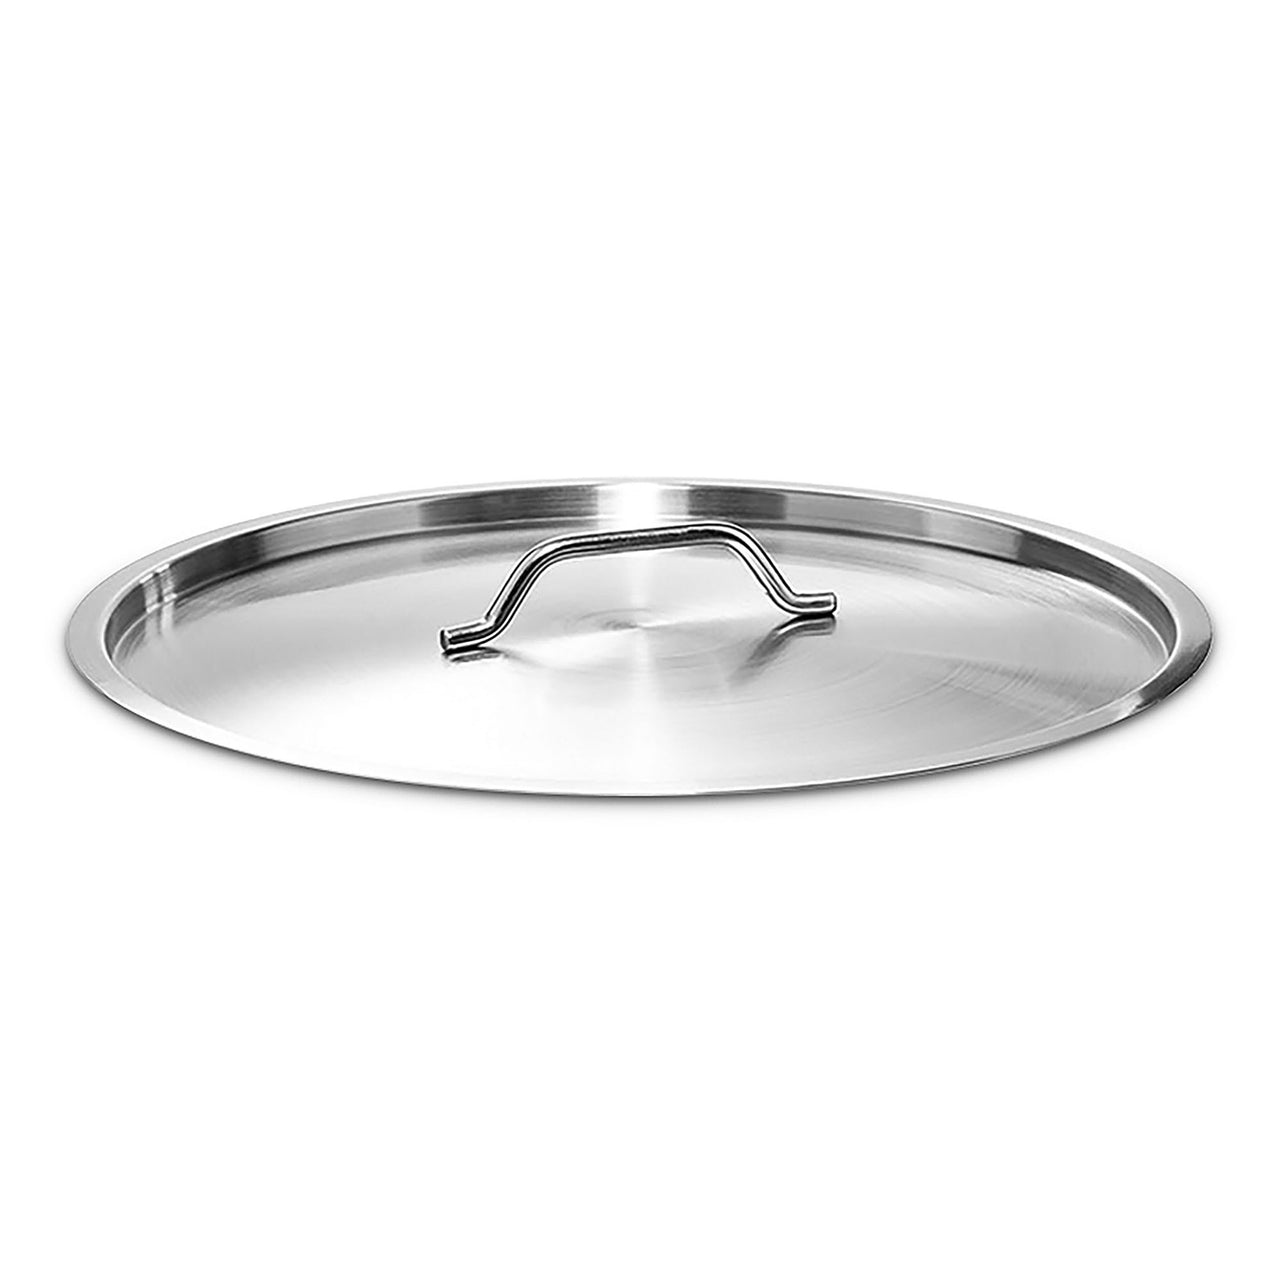 Silver Stainless Steel Stock Pot with Lid